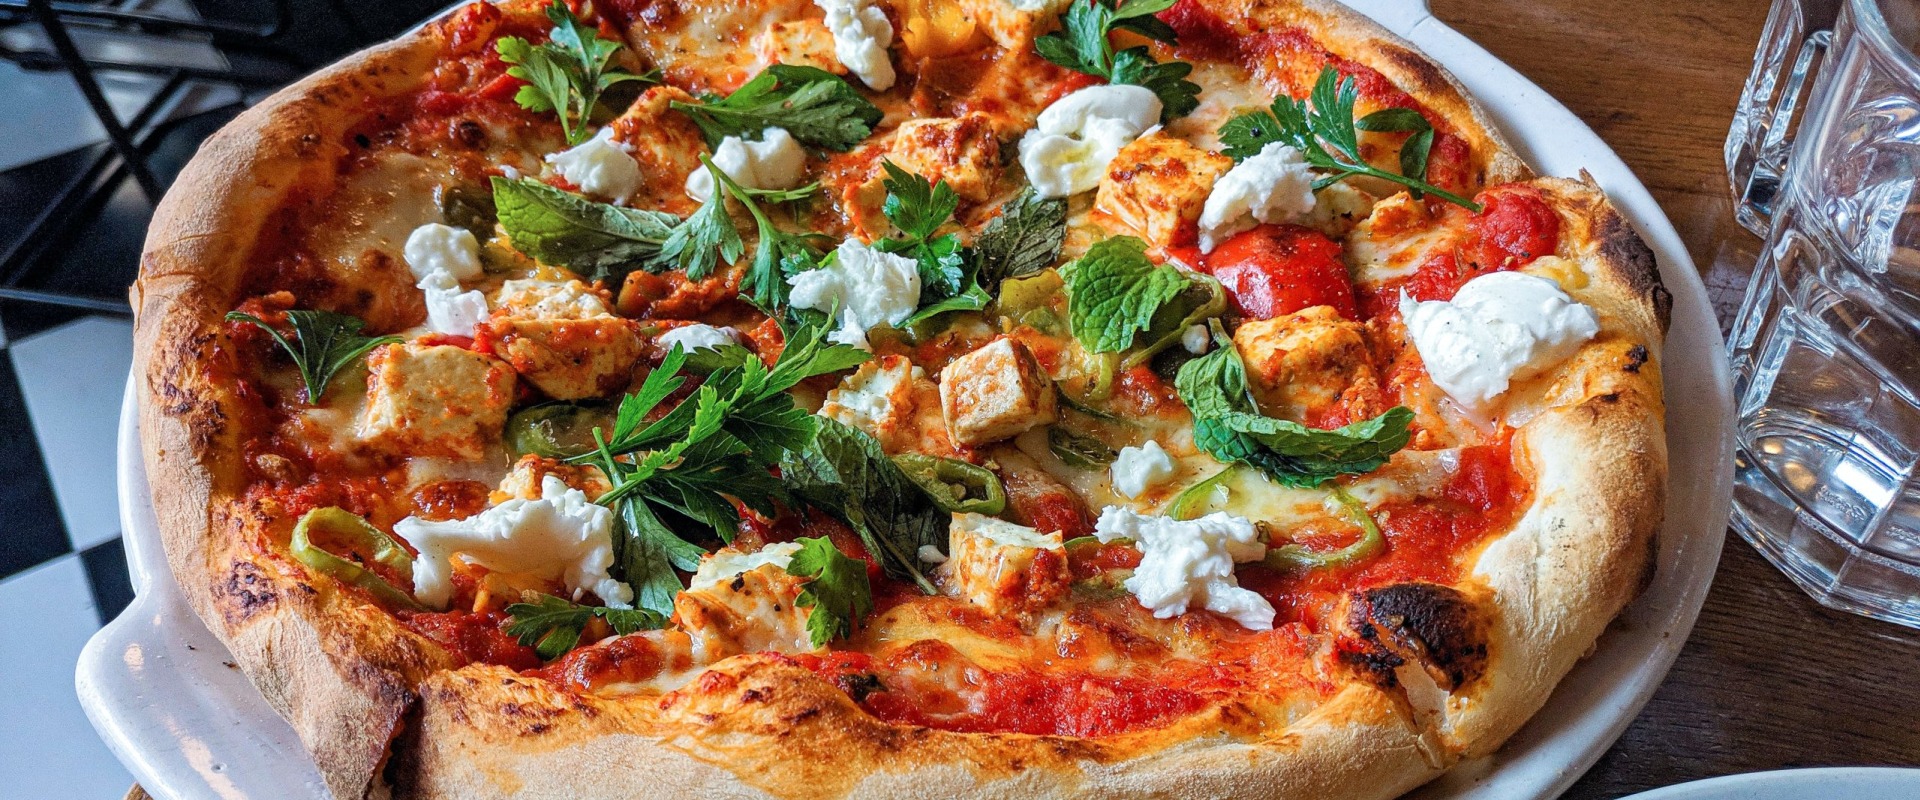 Discover the Best Buffalo Style Pizzas in Central Virginia